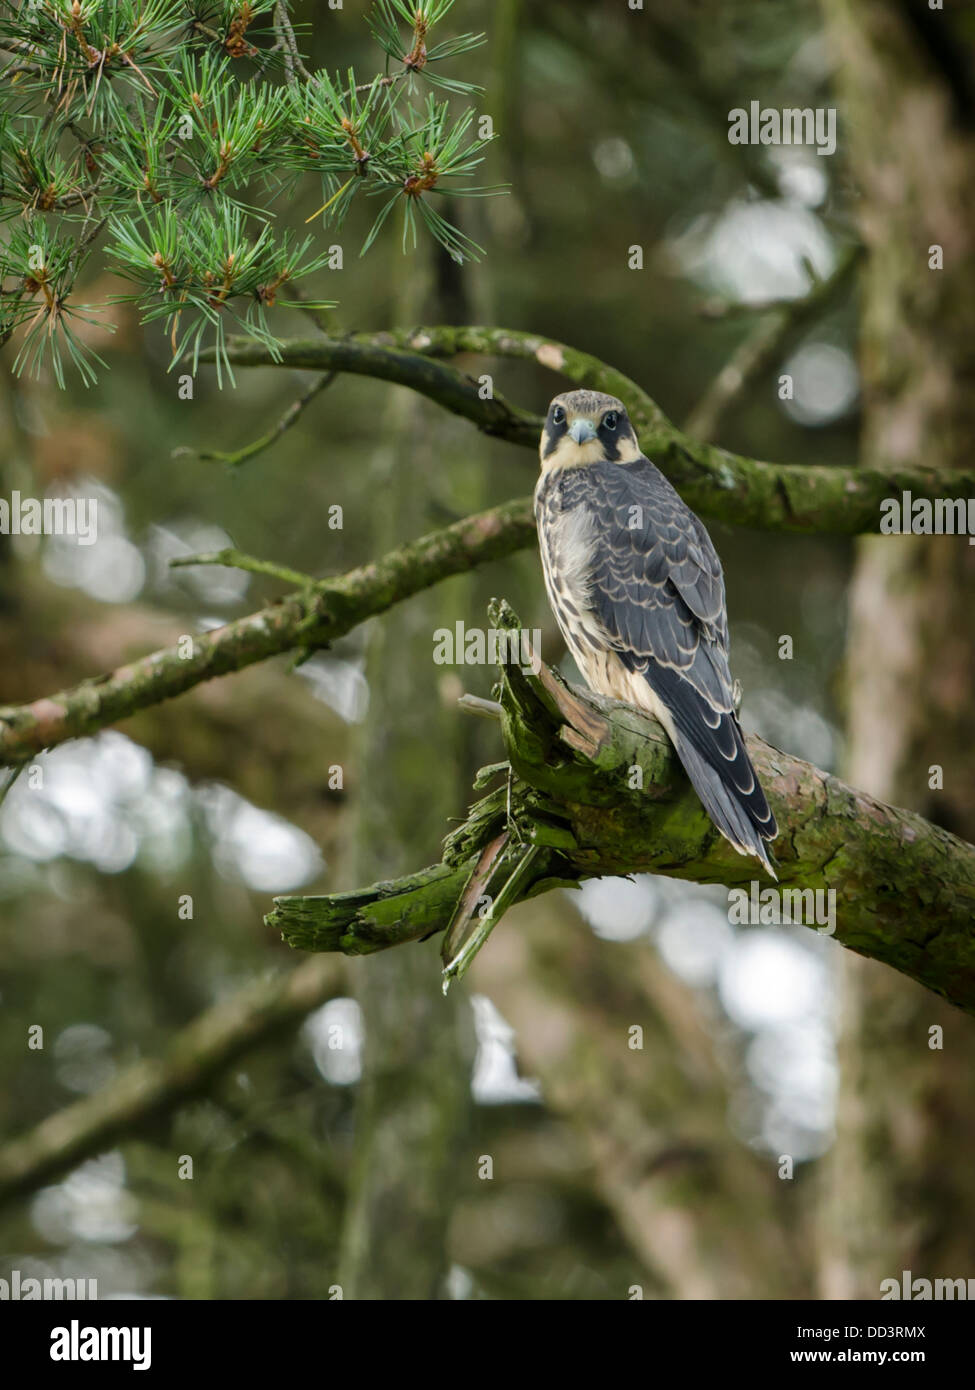 Young Hobby perched in tree Stock Photo